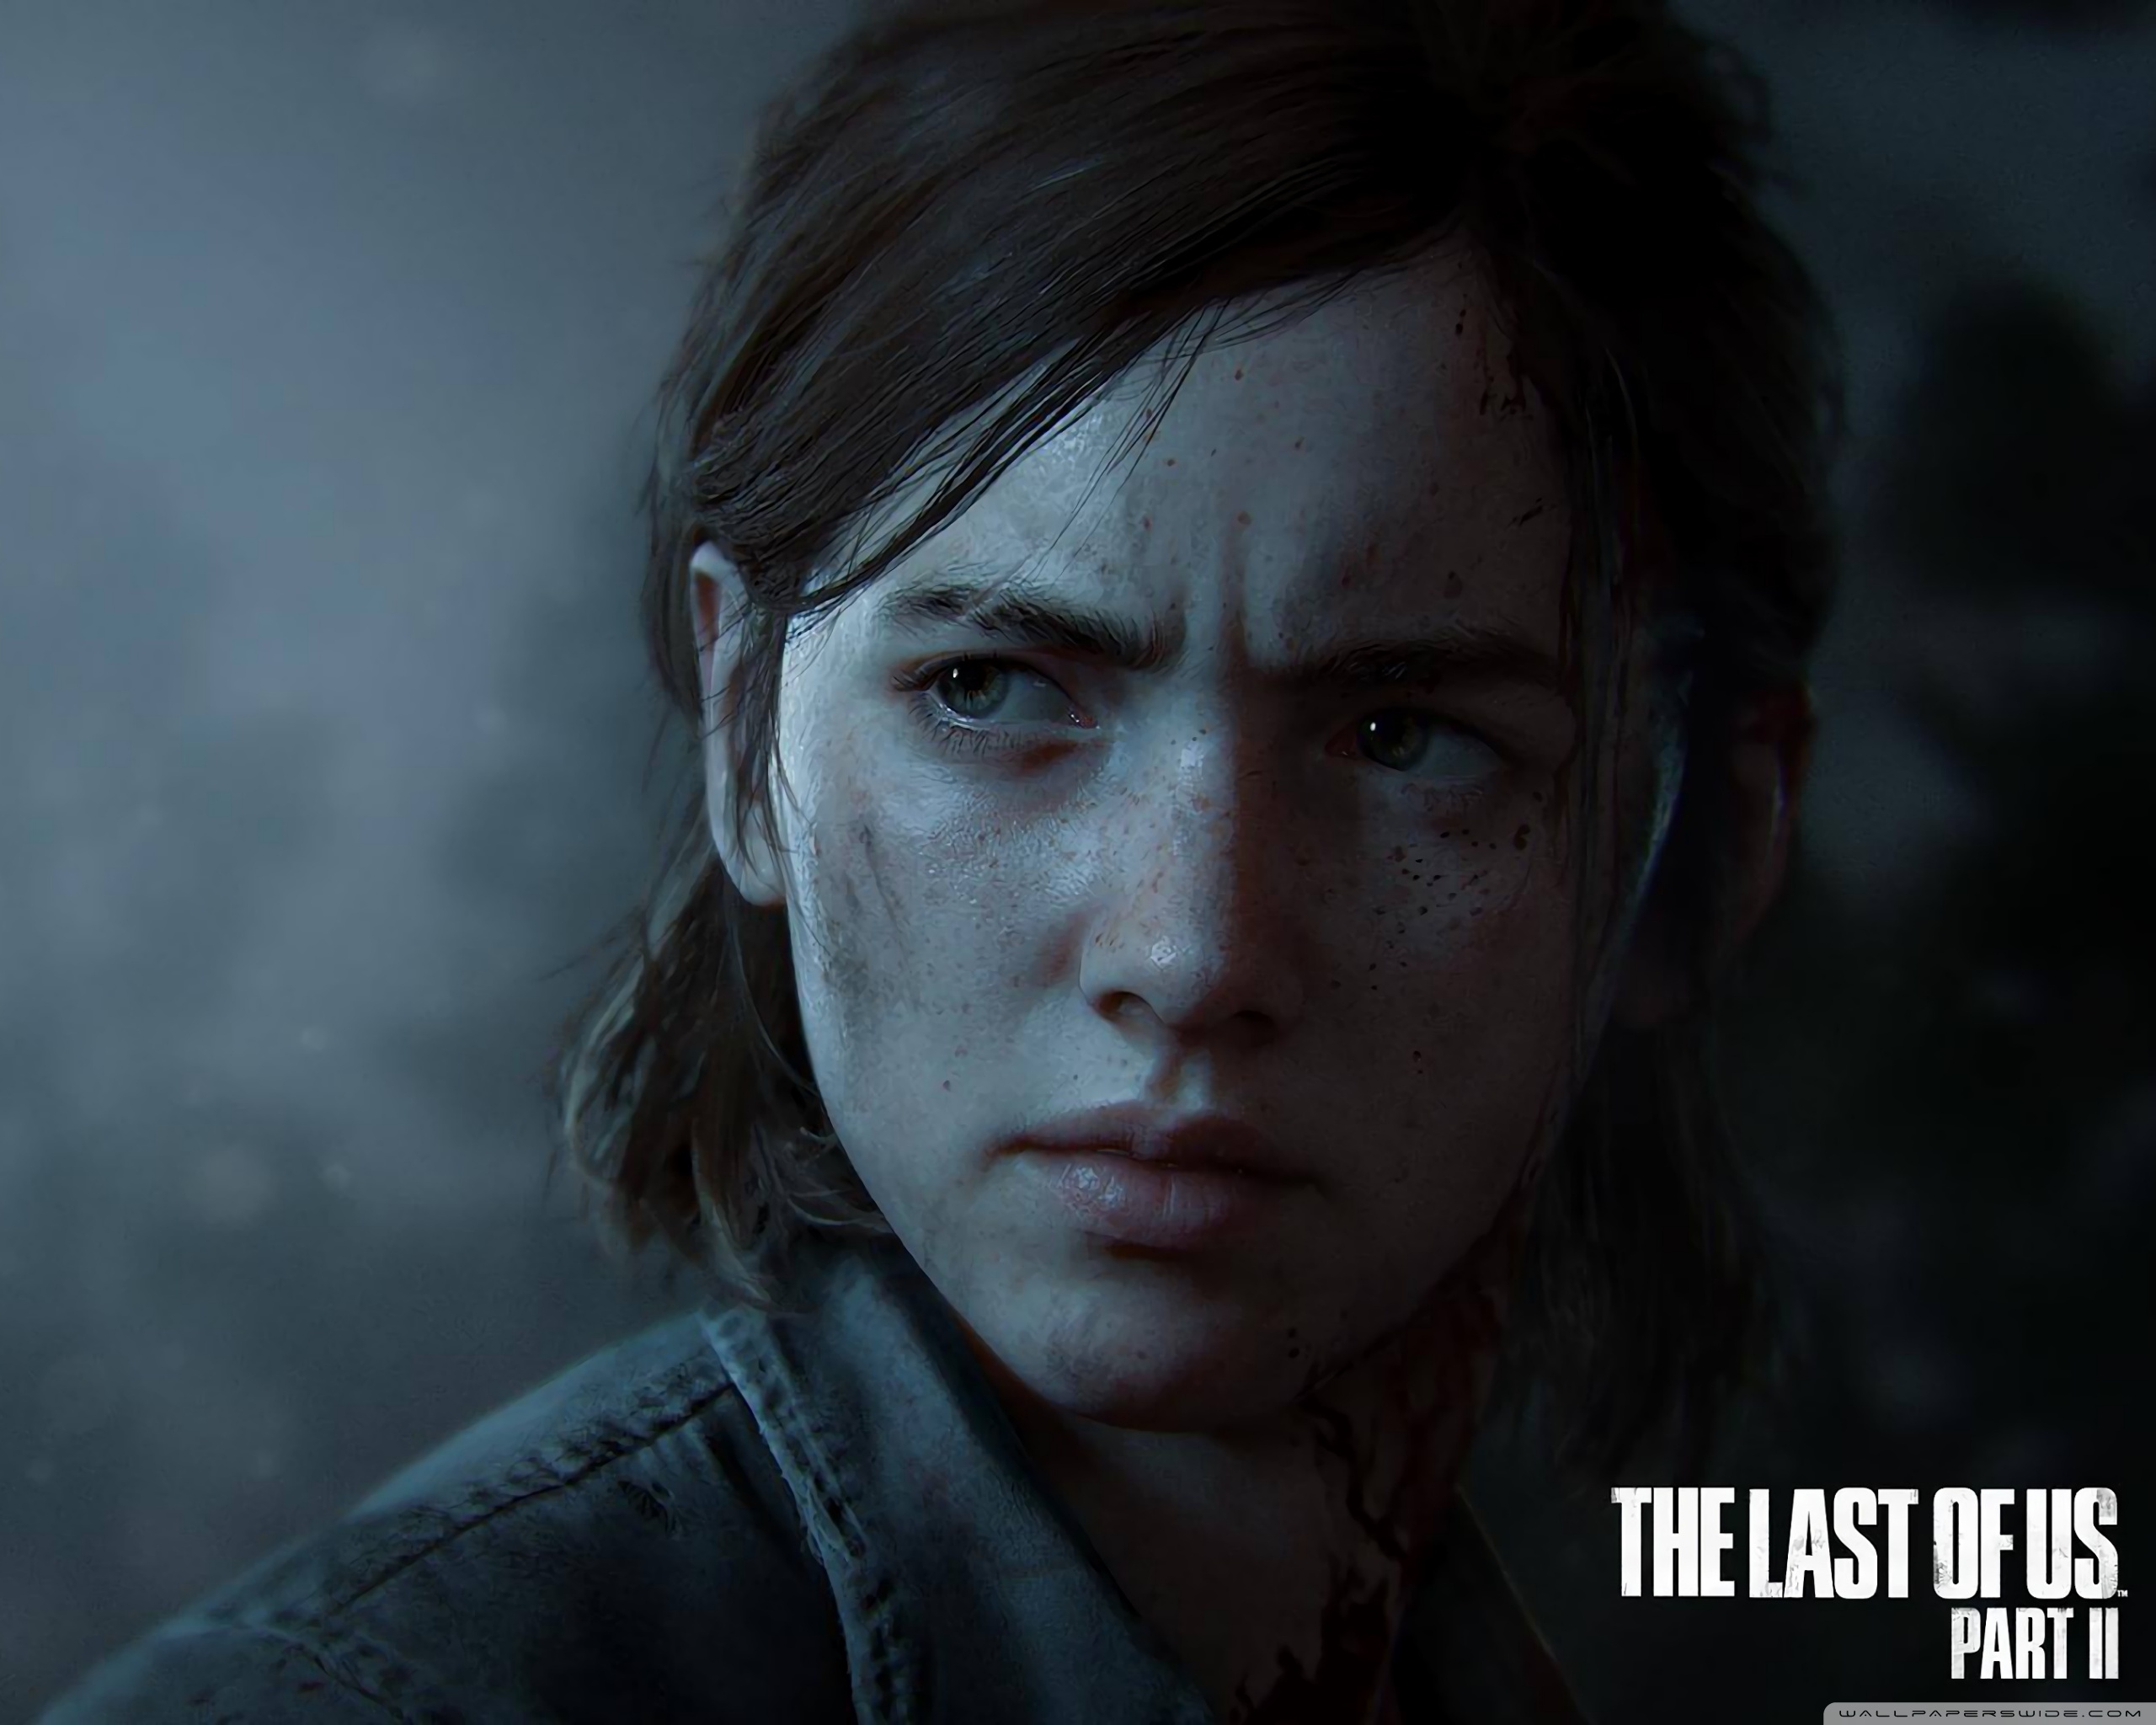 4K] 38 Wallpapers / Screenshots from The Last of Us Part 2 Reveal